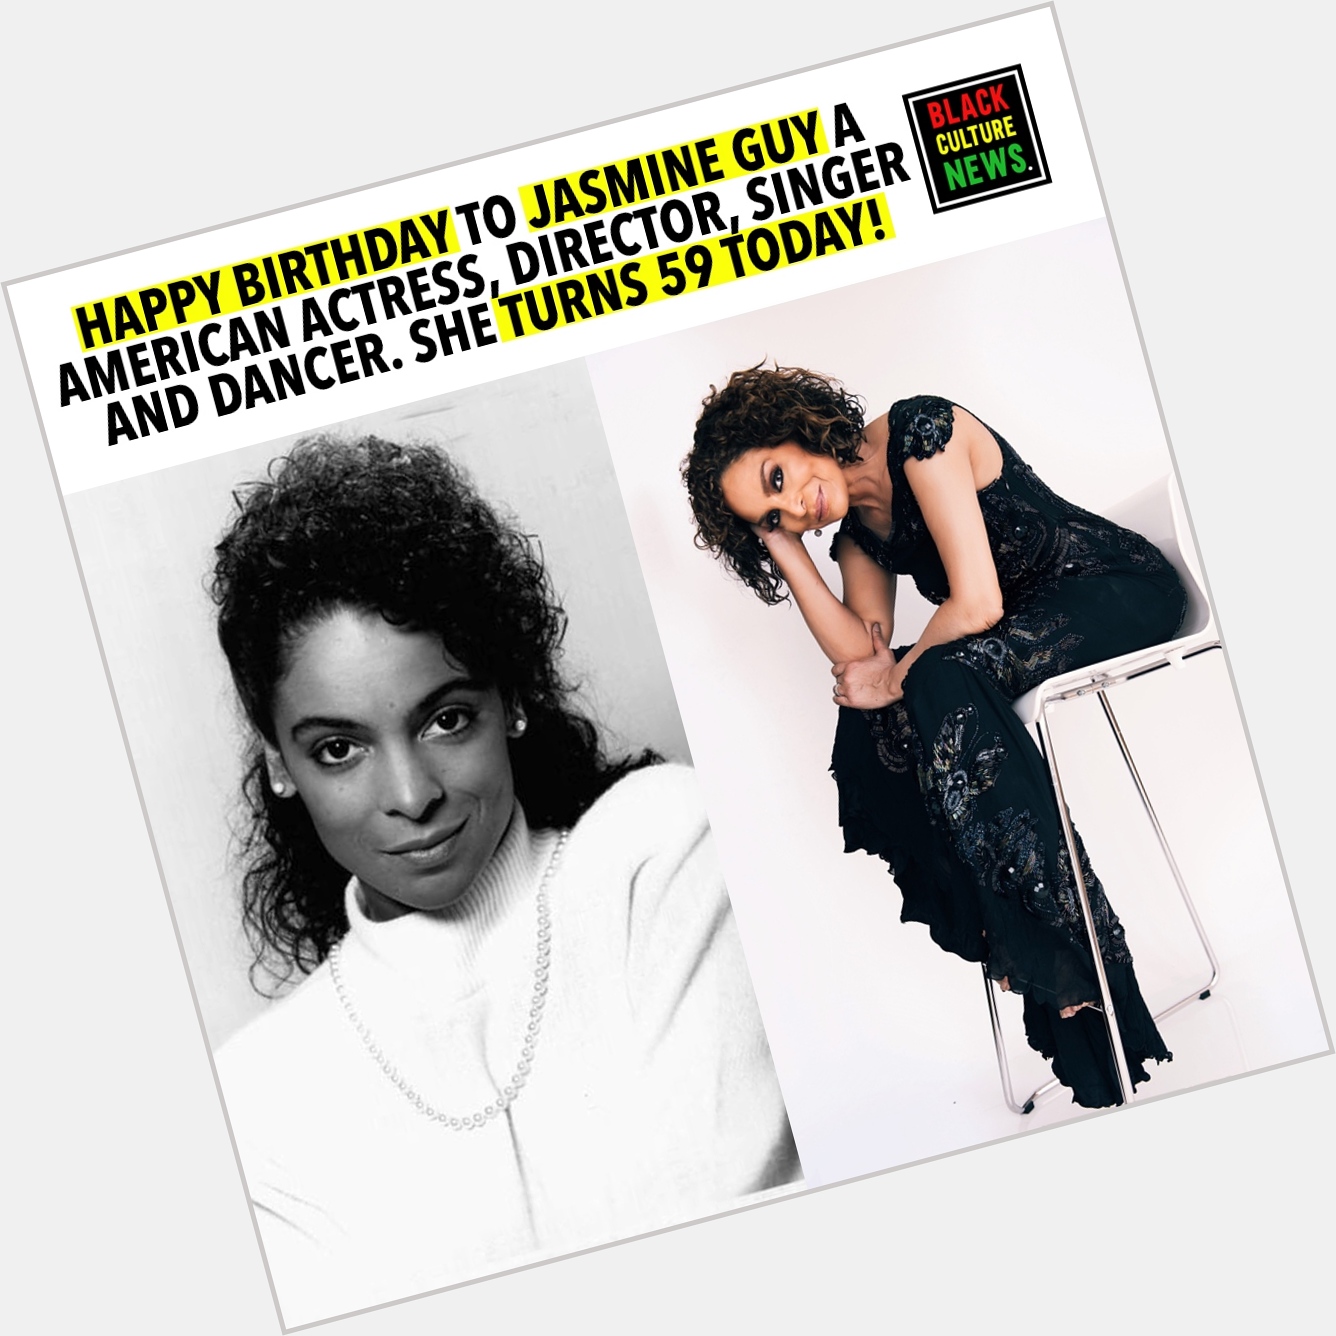 Happy 59th birthday to Jasmine Guy! We are wishing you many more to come.  